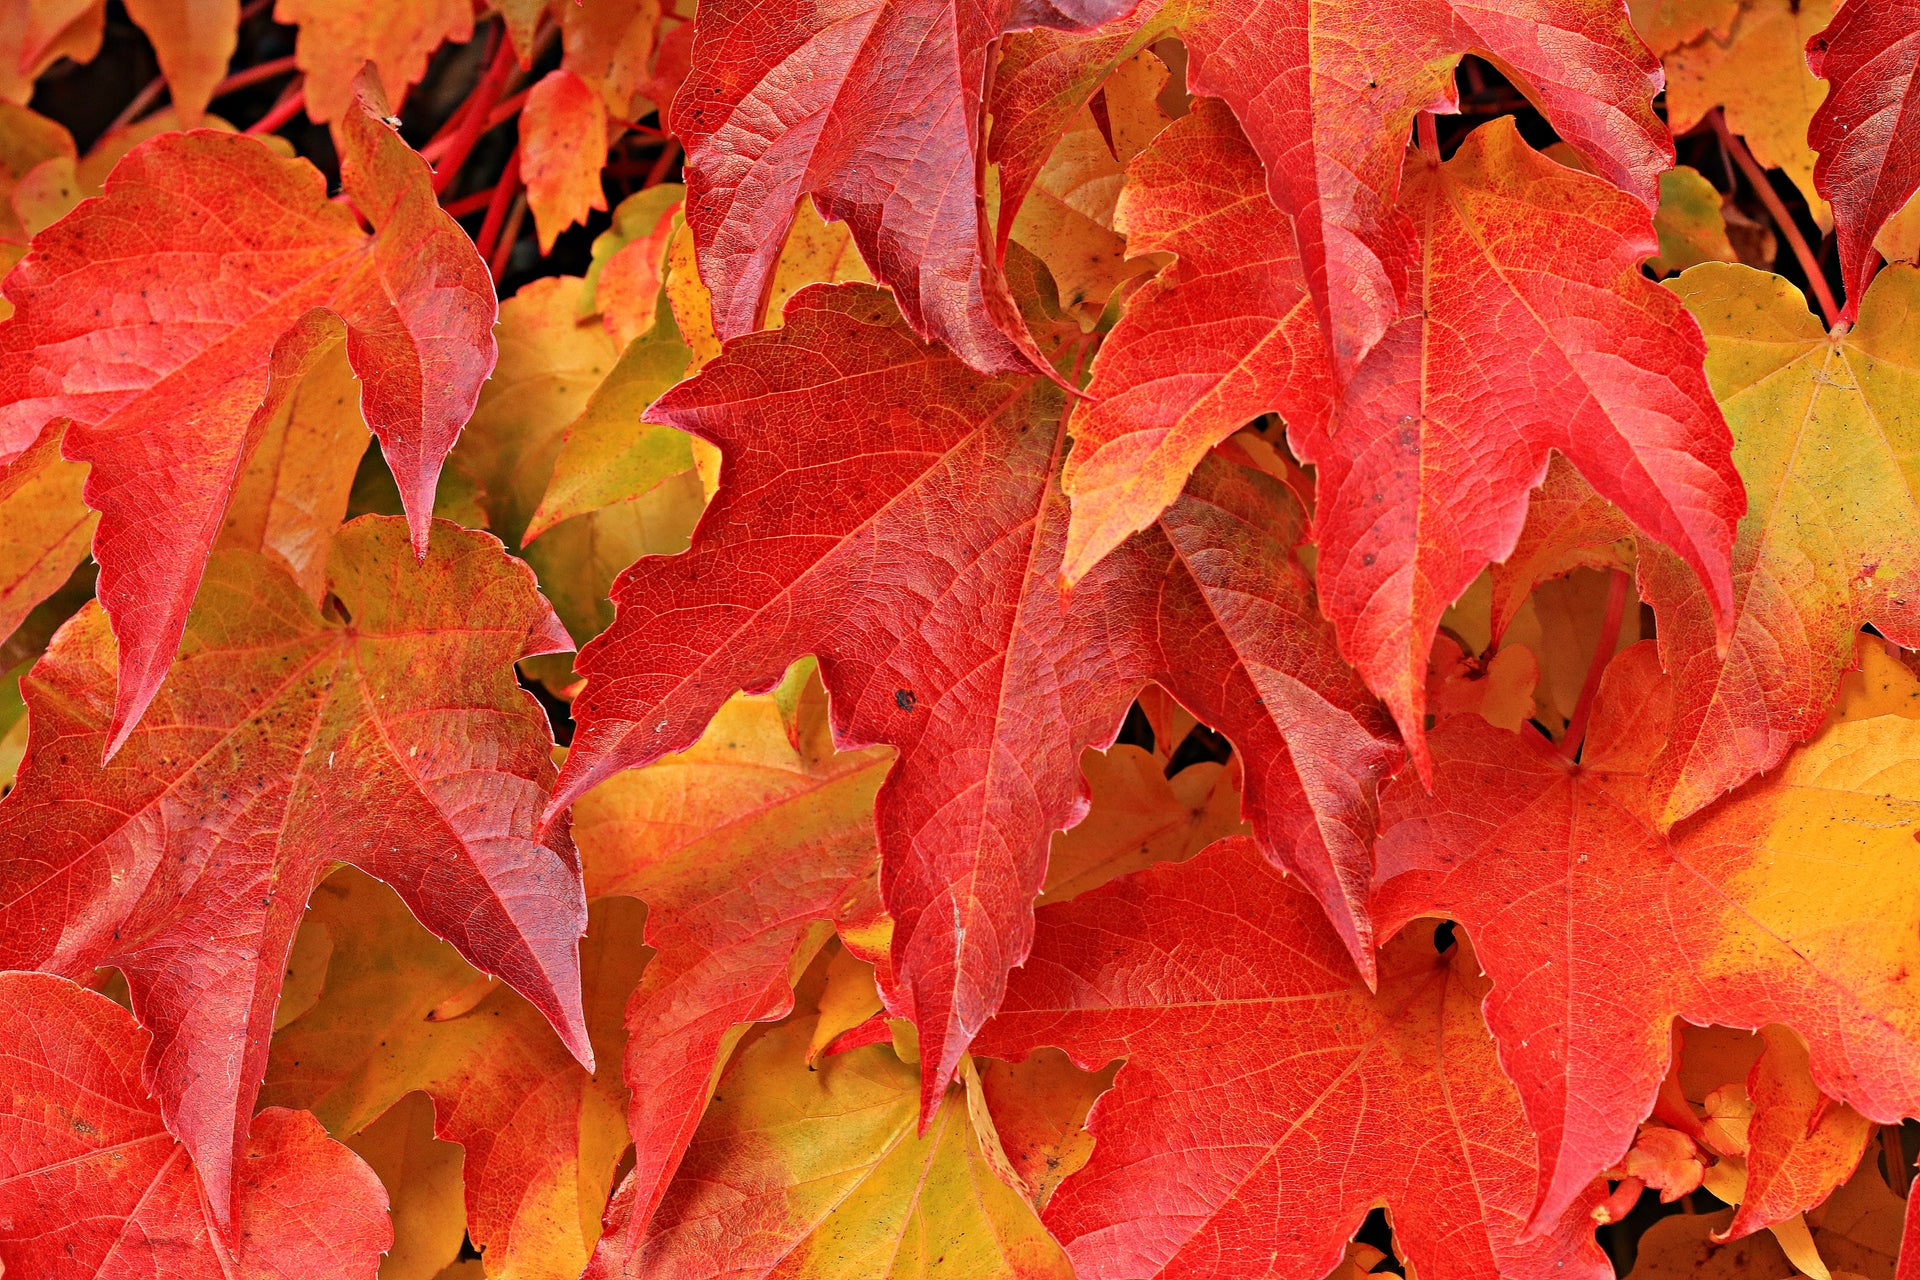 Image of red and yellow autumn leaves